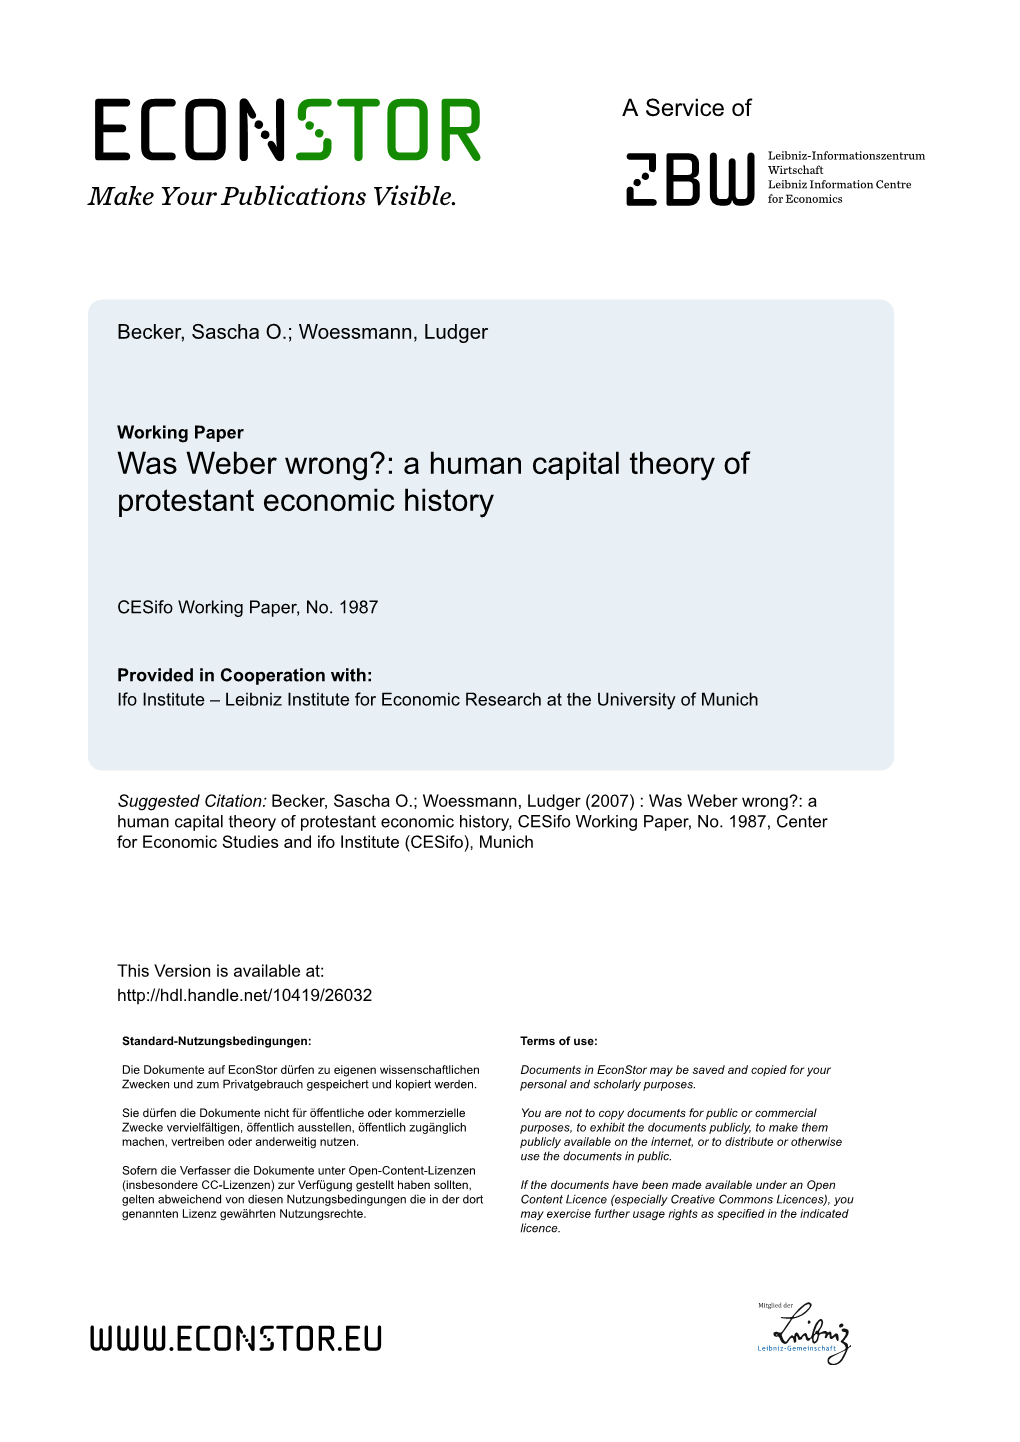 Was Weber Wrong?: a Human Capital Theory of Protestant Economic History